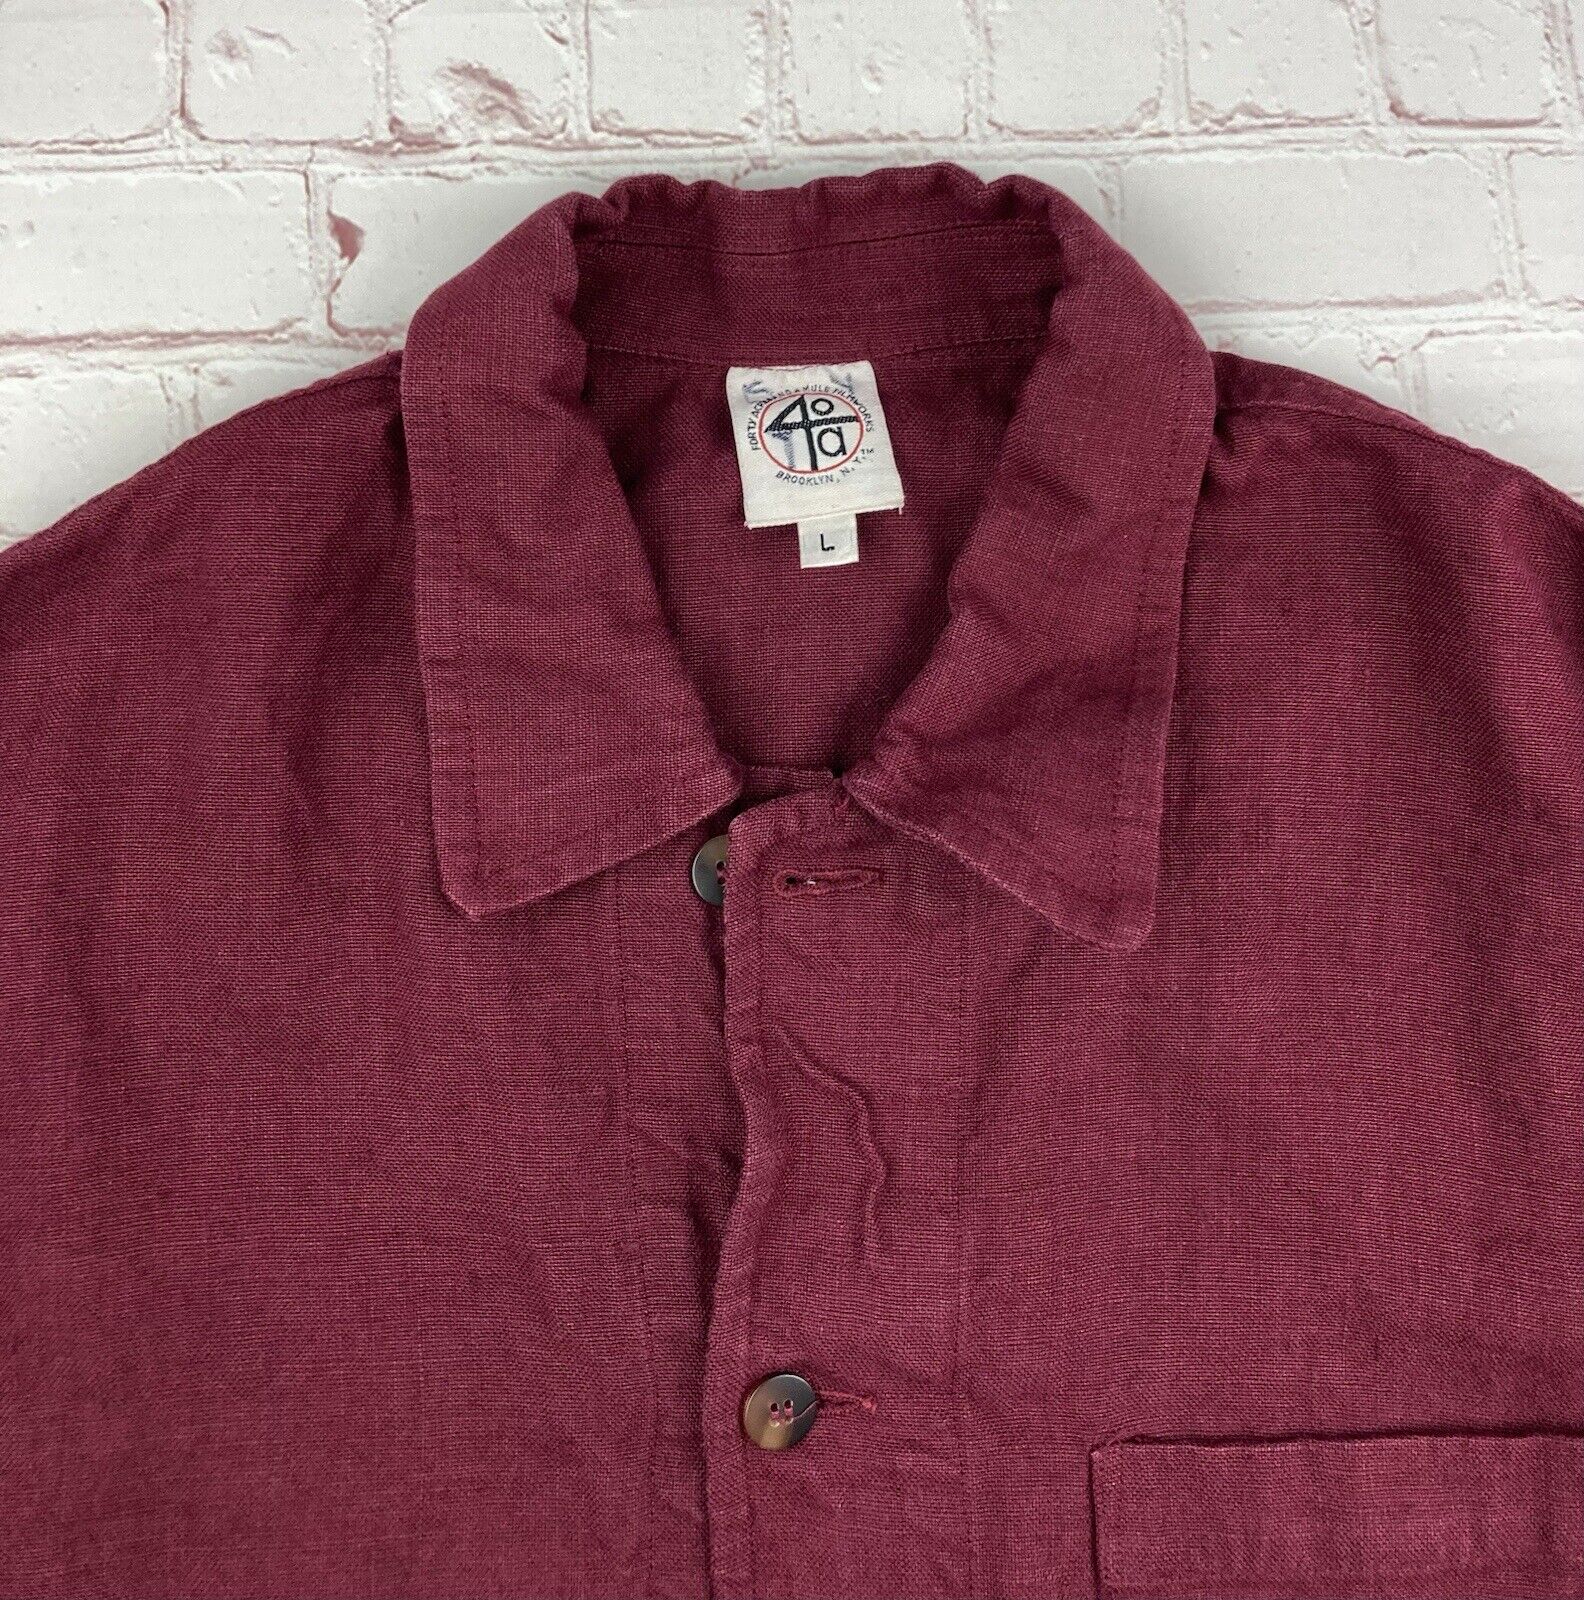 40 Acres And A Mule Spike Lee Do The Right Button Down Shirt Brooklyn Men’s LG